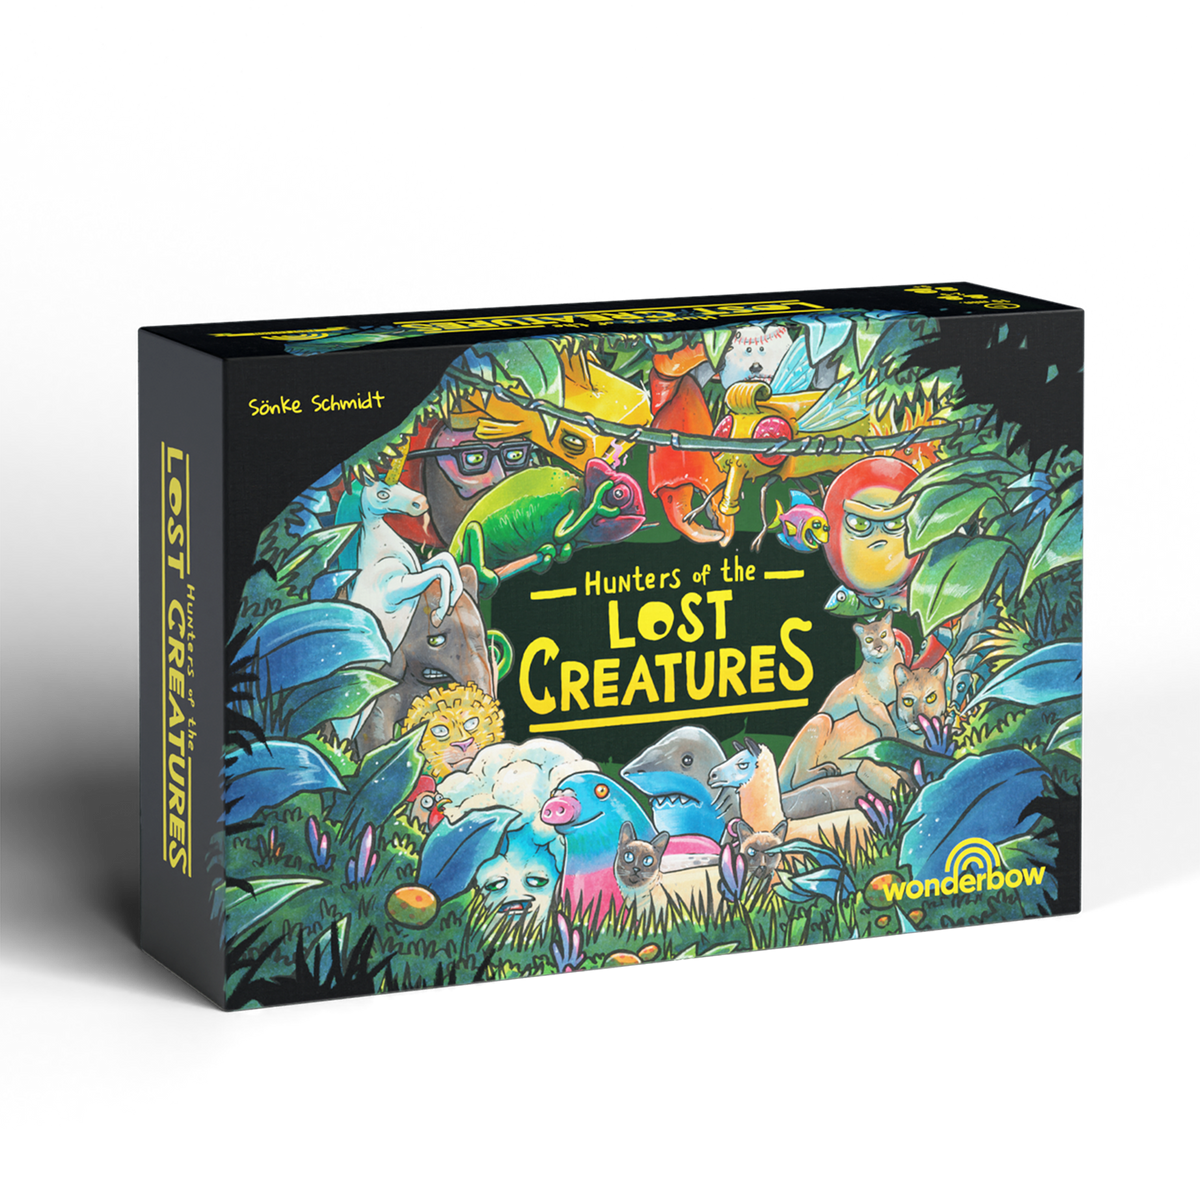 Hunters of the Lost Creatures - Limited First Edition